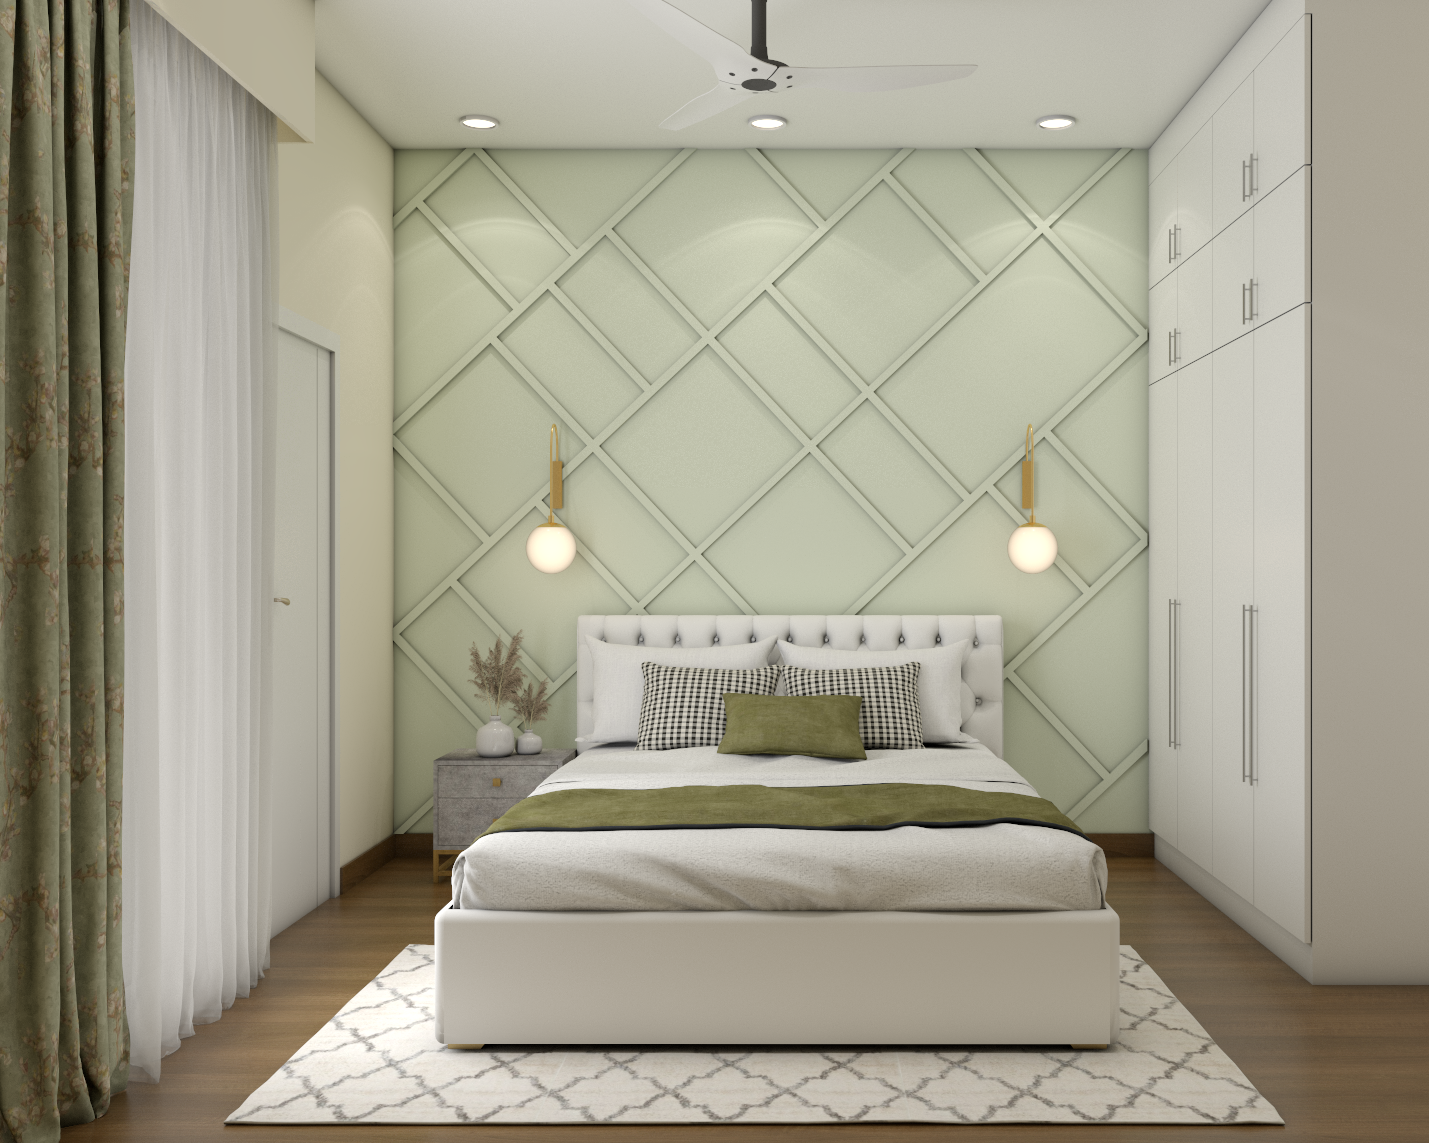 Modern Guest Bedroom Design With Geometric Panelling